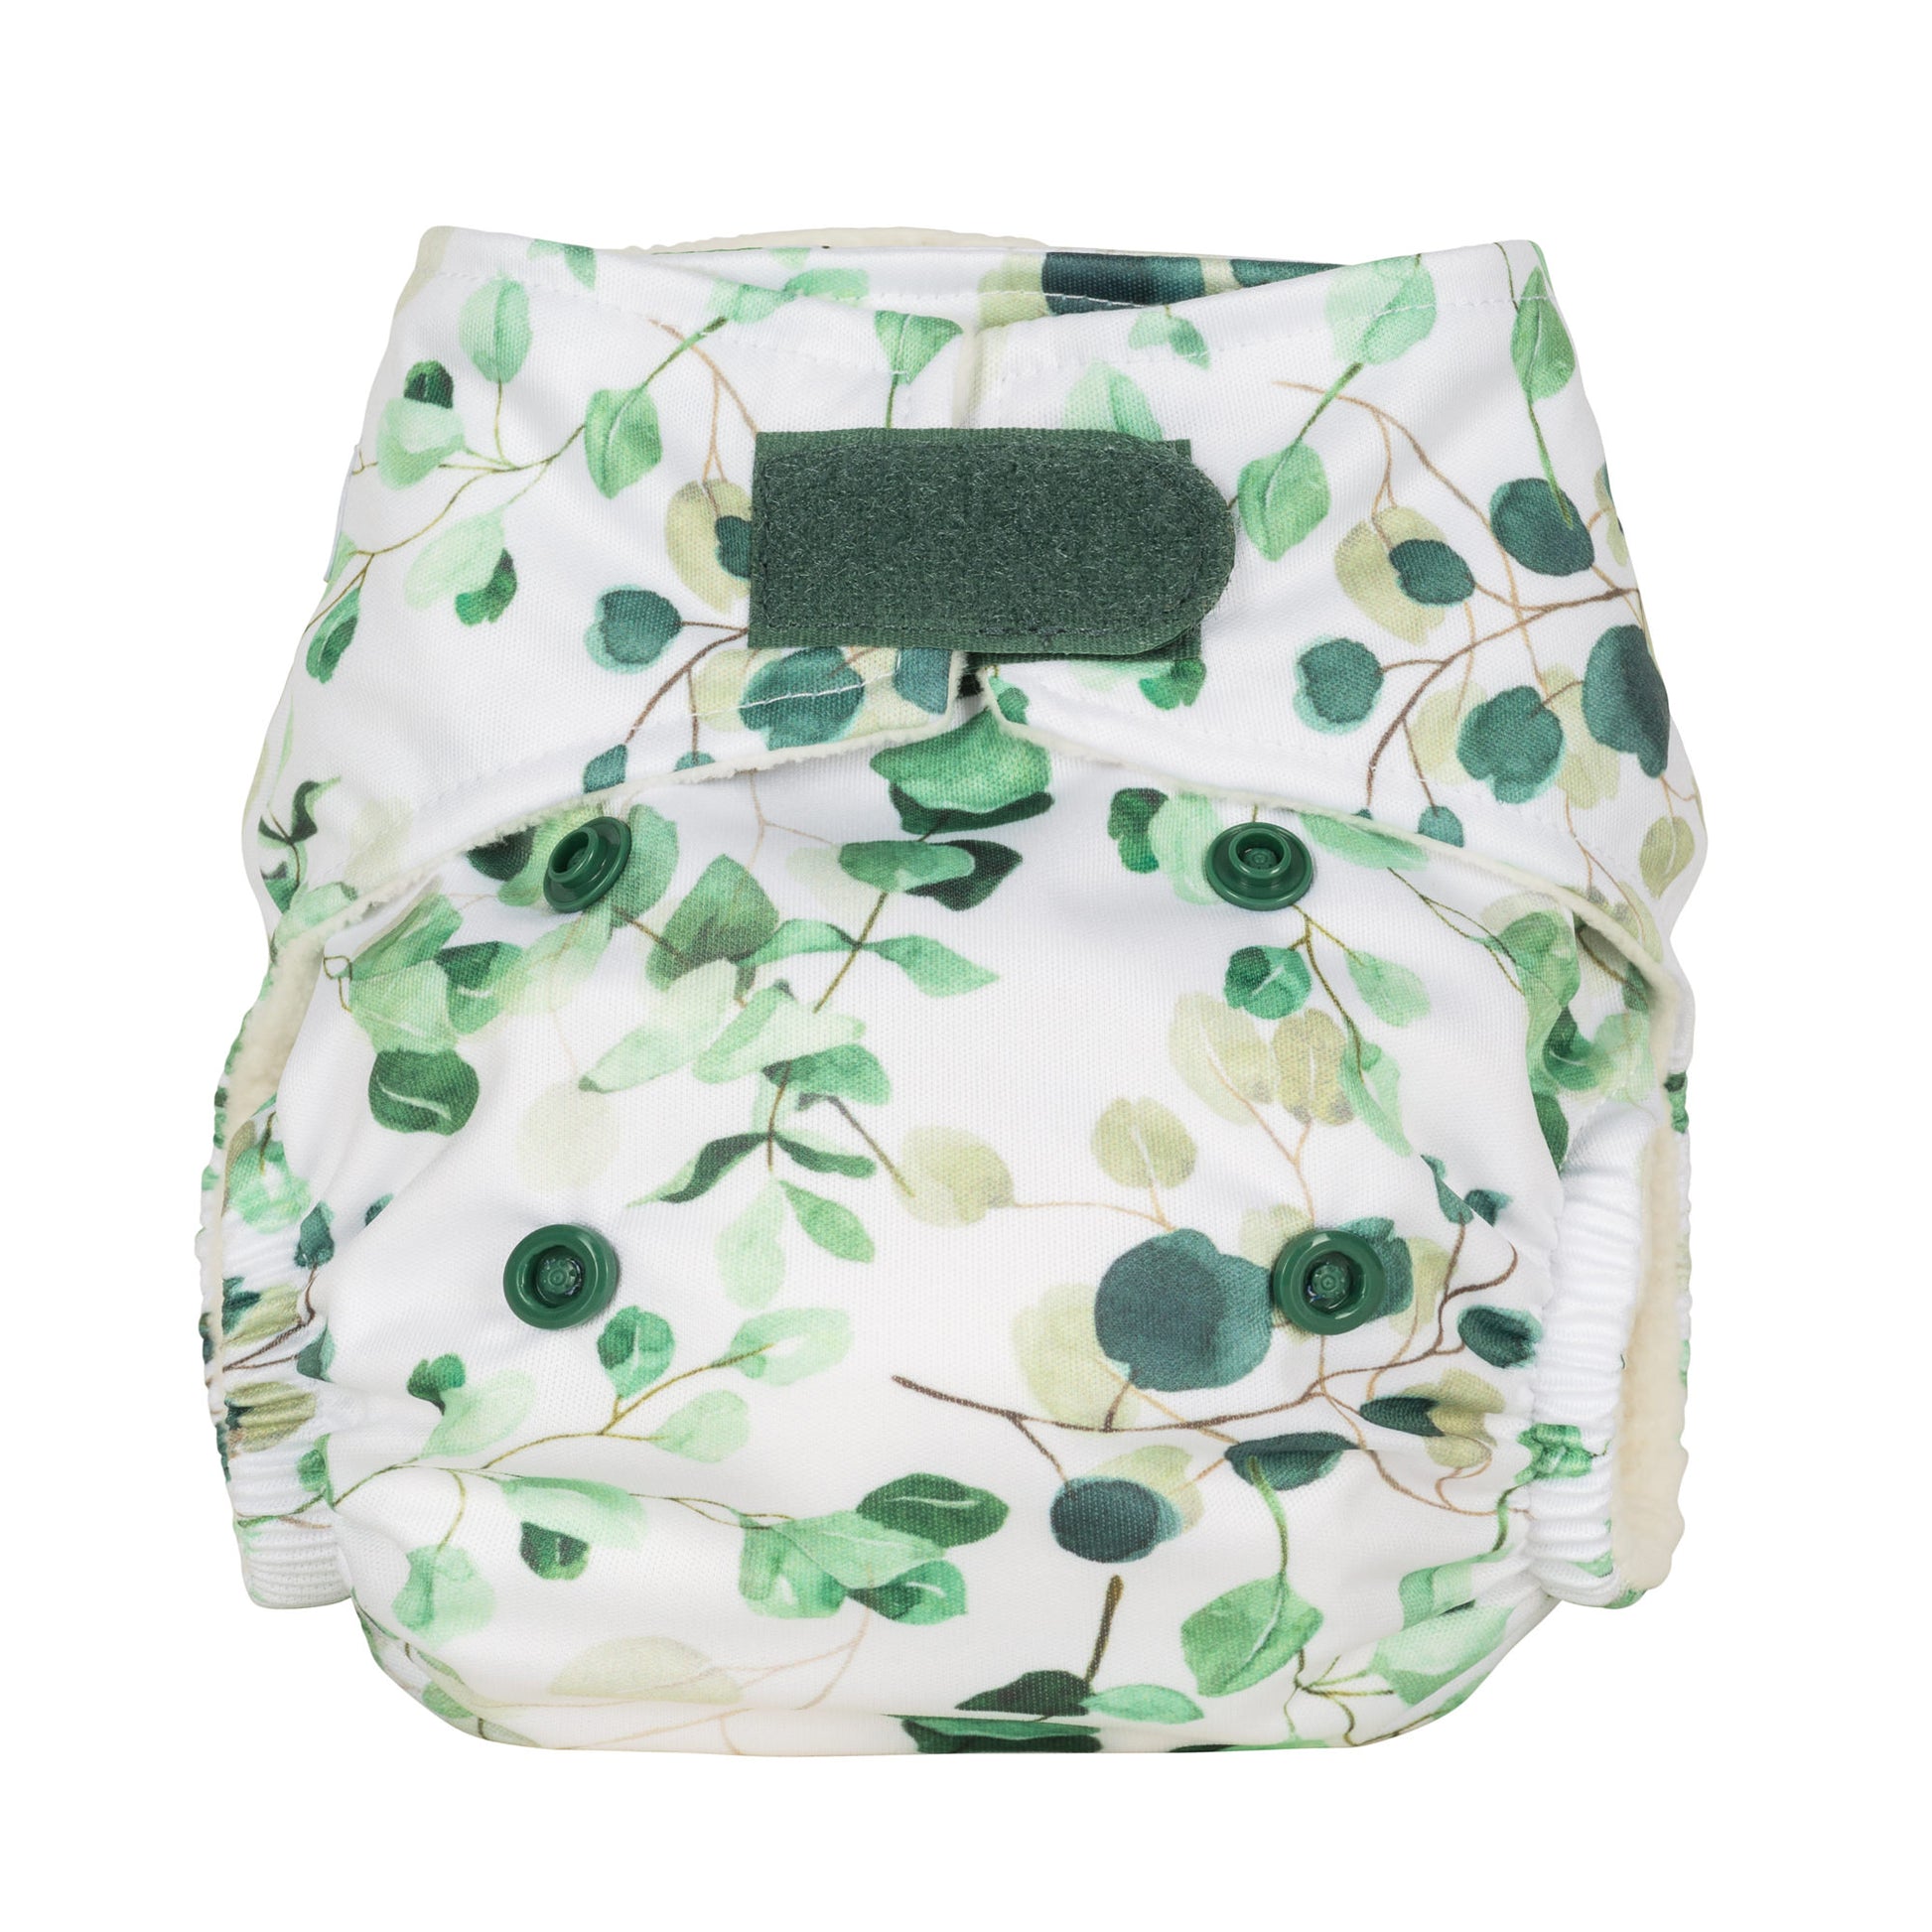 A newborn reusable cloth nappy with a white background and green eucalyptus leaves printed on it. The nappy features a velcro fastening. 